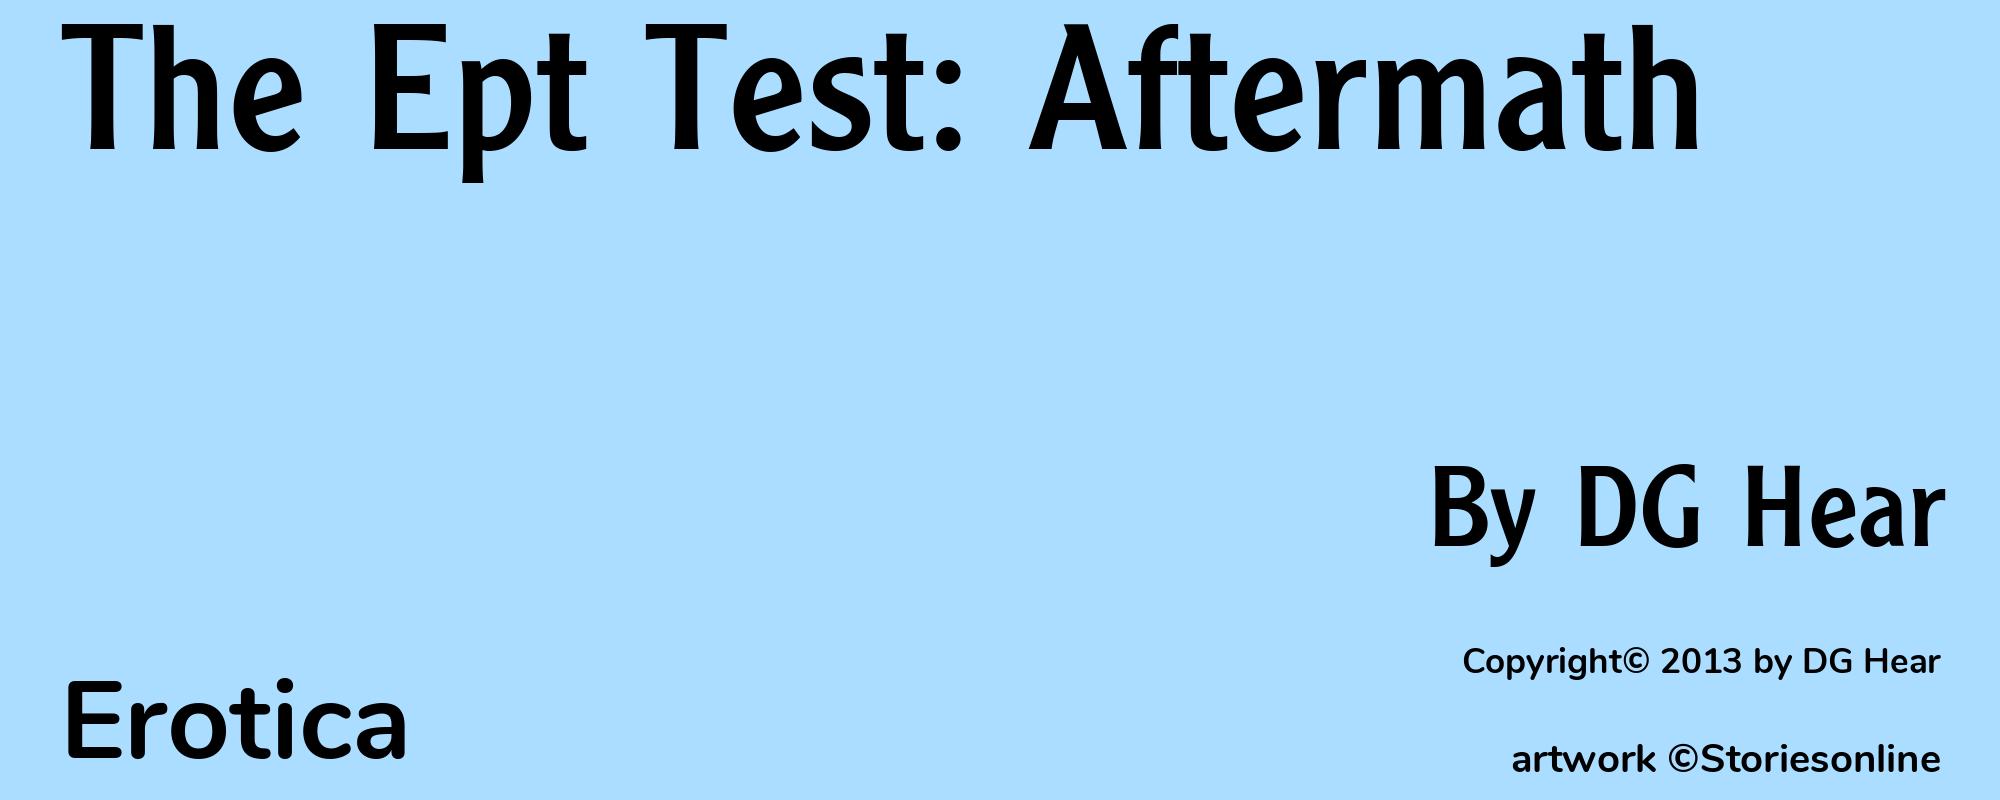 The Ept Test: Aftermath - Cover